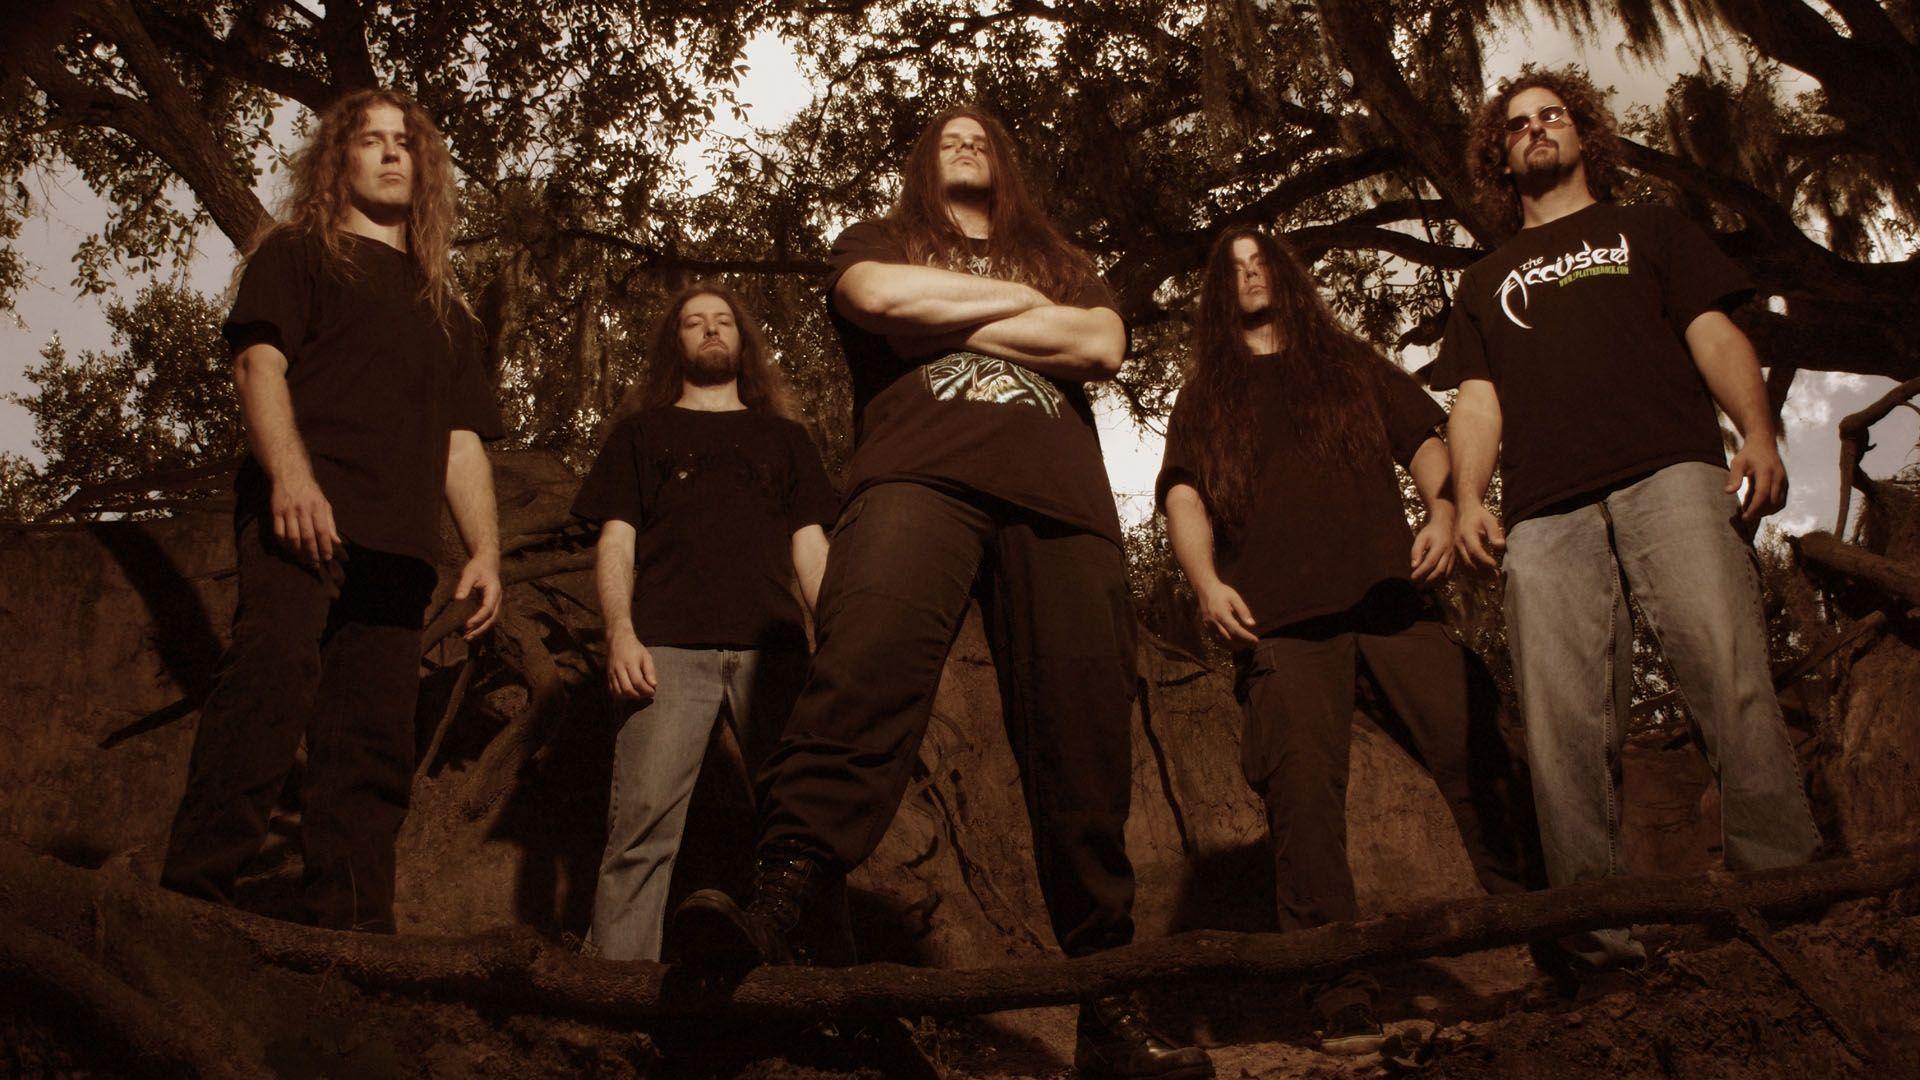 Download Wallpaper 1920x1080 Cannibal Corpse, Trees, T Shirts, Sky